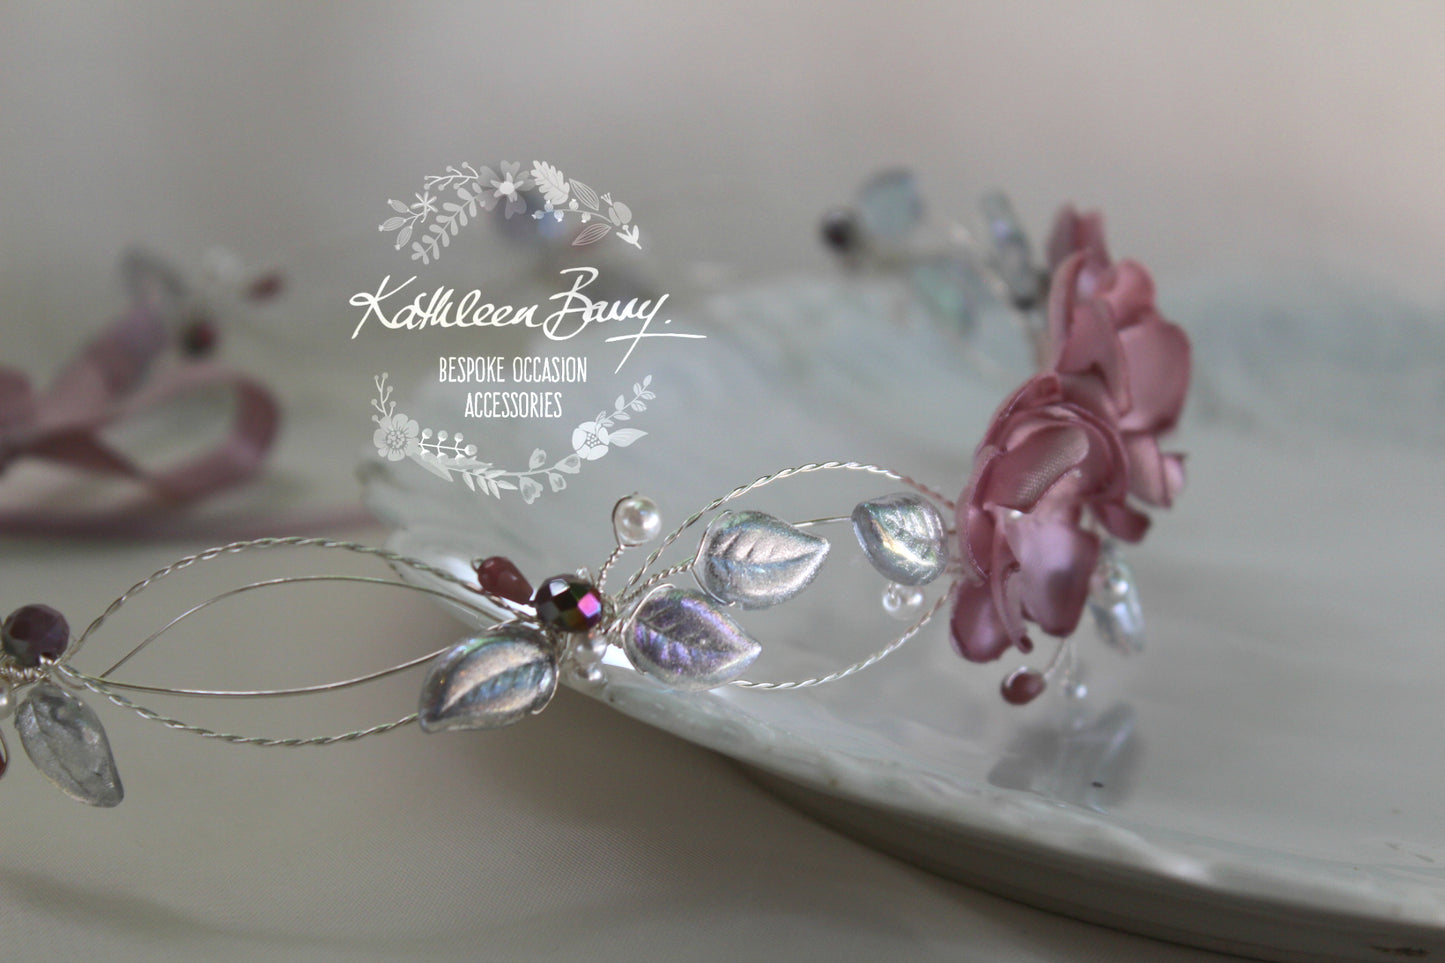 Natalie silver leaf headband and dusty pink mauve fabric flower (custom colors available)